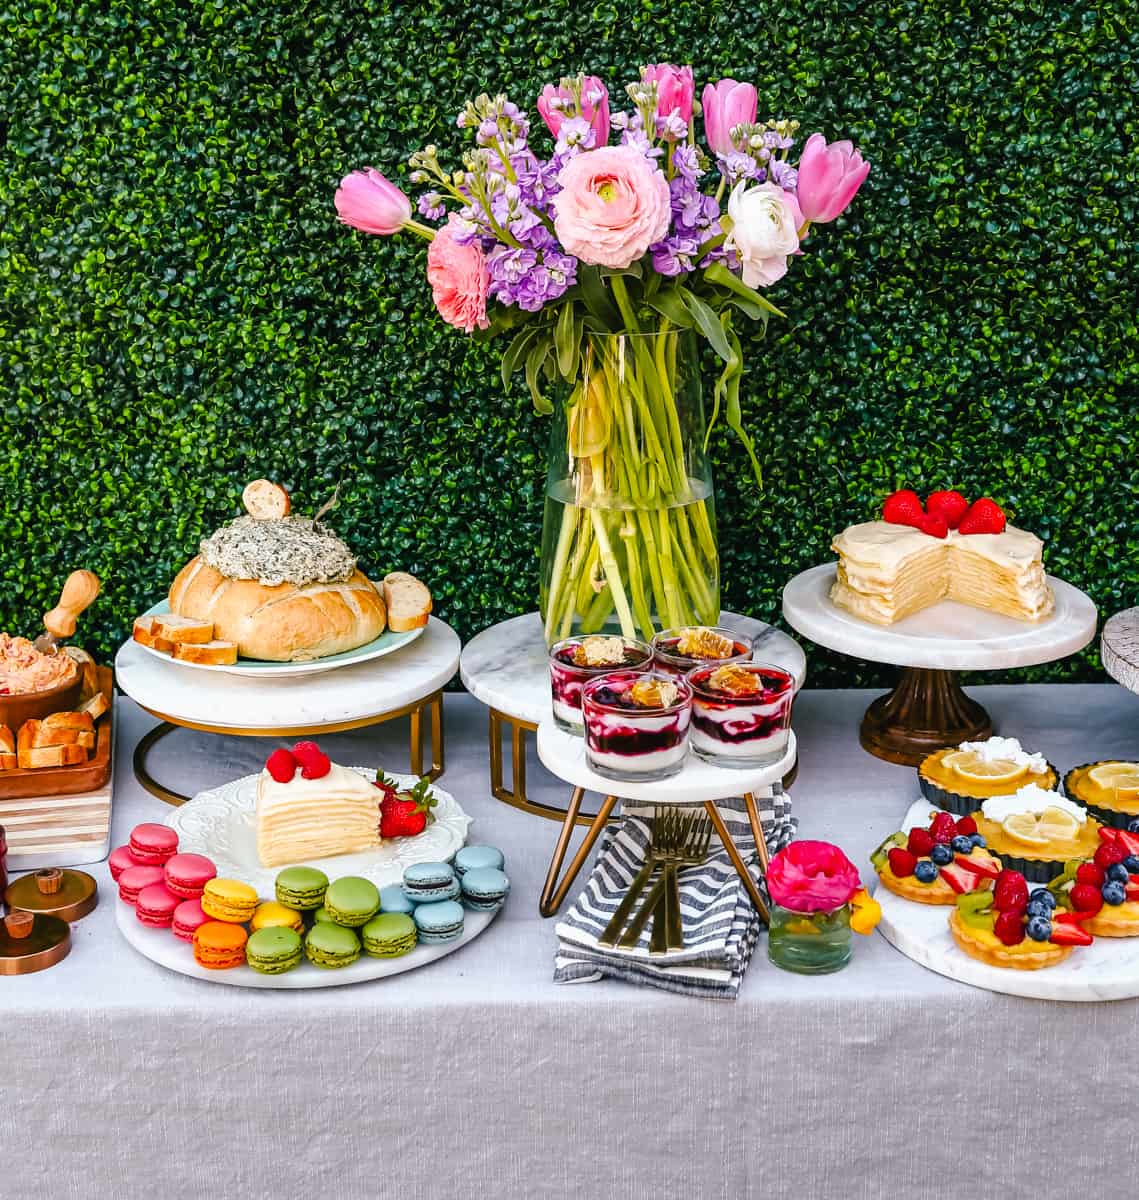 How to create the Ultimate Spring Brunch or Spring Party with an assortment of both sweet and savory breakfast items and beautiful desserts. 30+ Spring and Easter Party Food Ideas. How to decorate for a Spring Brunch and Party too.